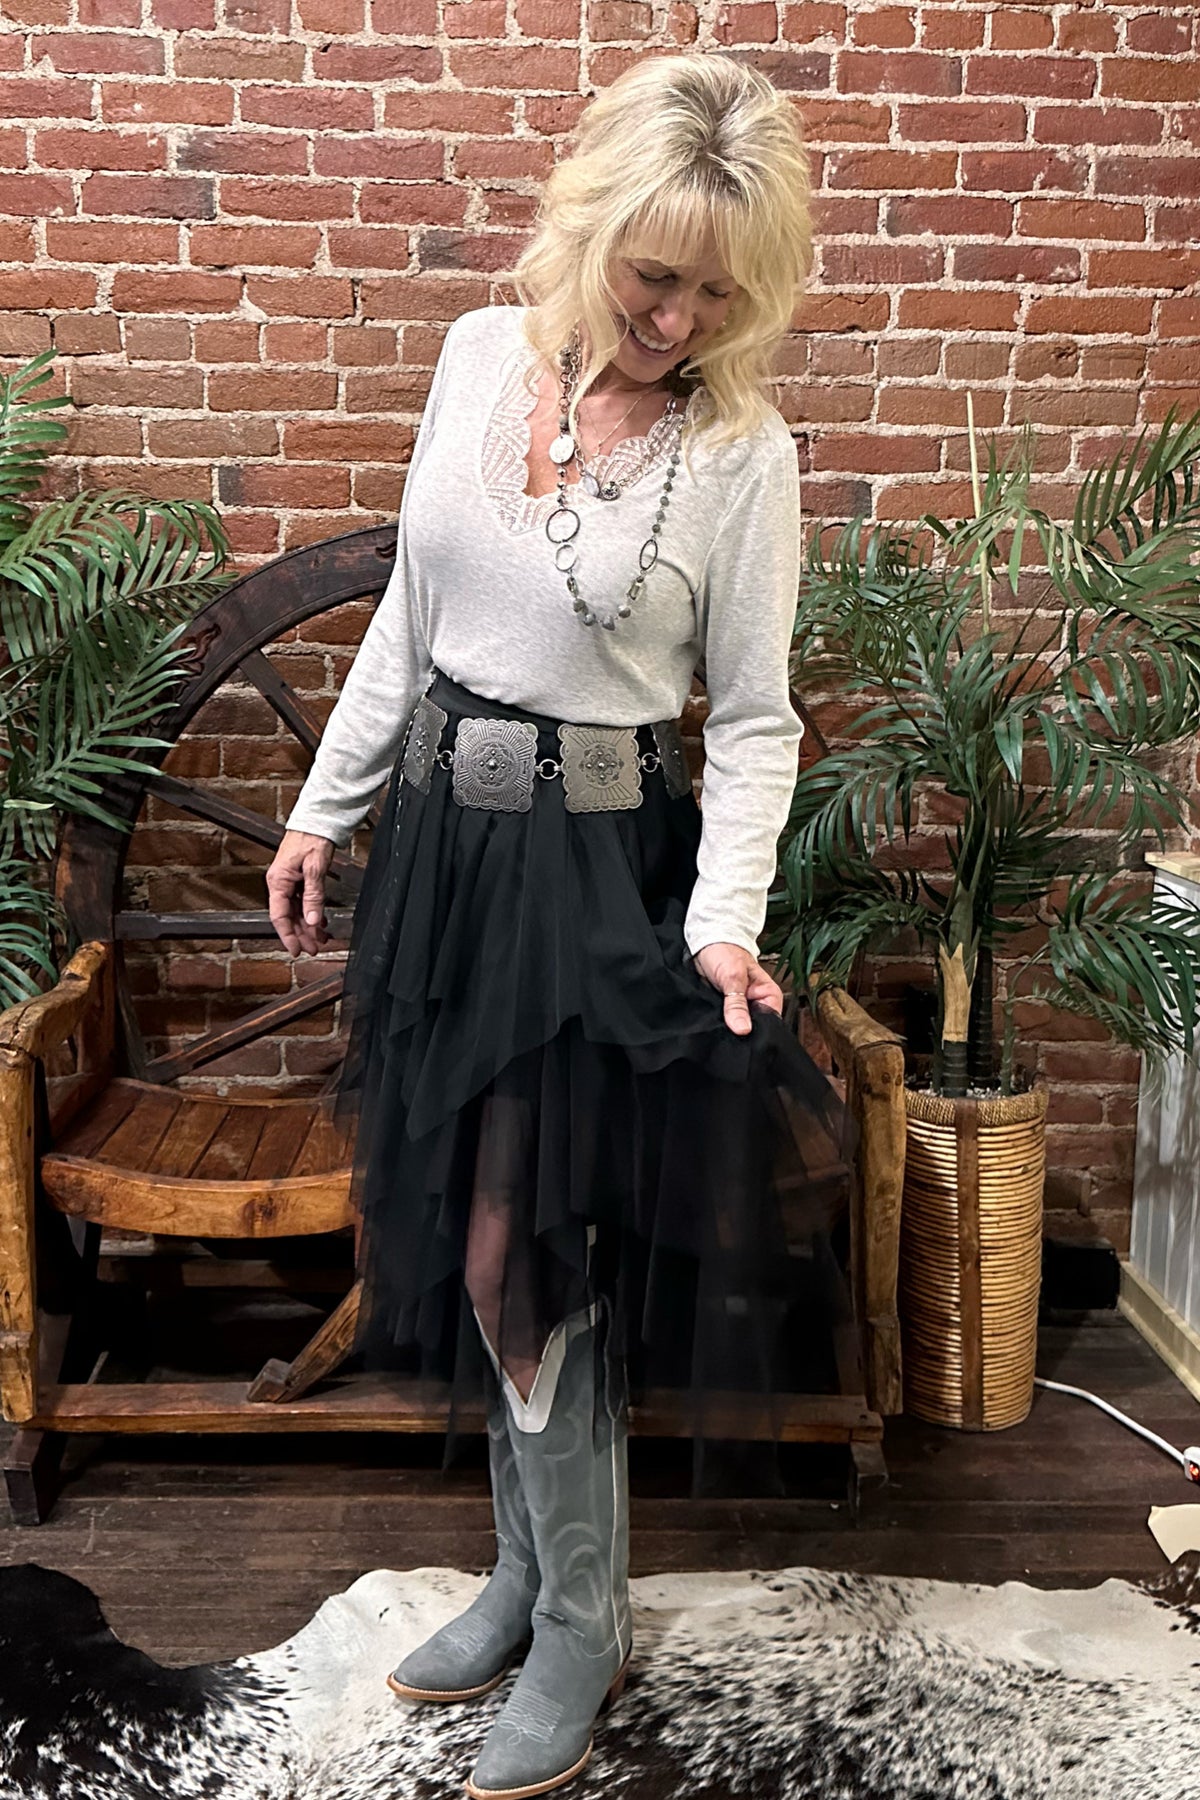 Layered Lace Inspired Mesh Skirt by Origami Apparel-Skirt-Origami-Gallop 'n Glitz- Women's Western Wear Boutique, Located in Grants Pass, Oregon